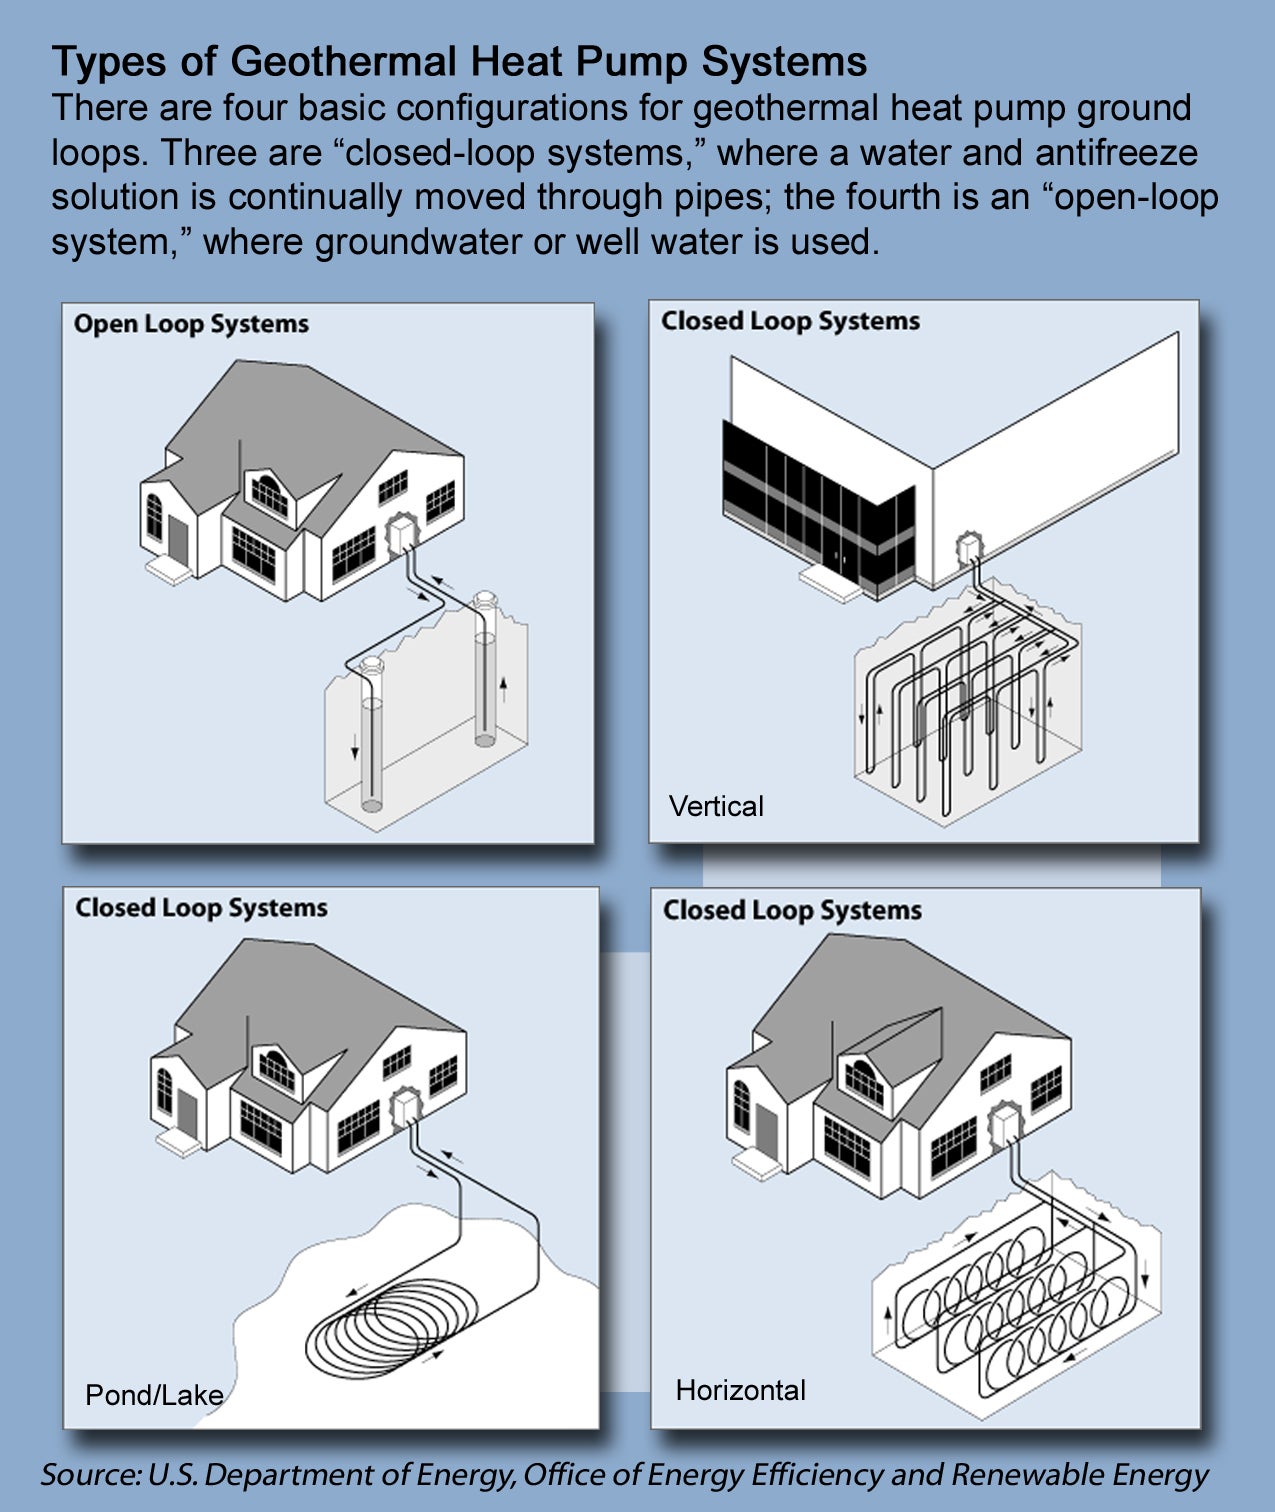 Types of Geothermal Heat Pump Systems